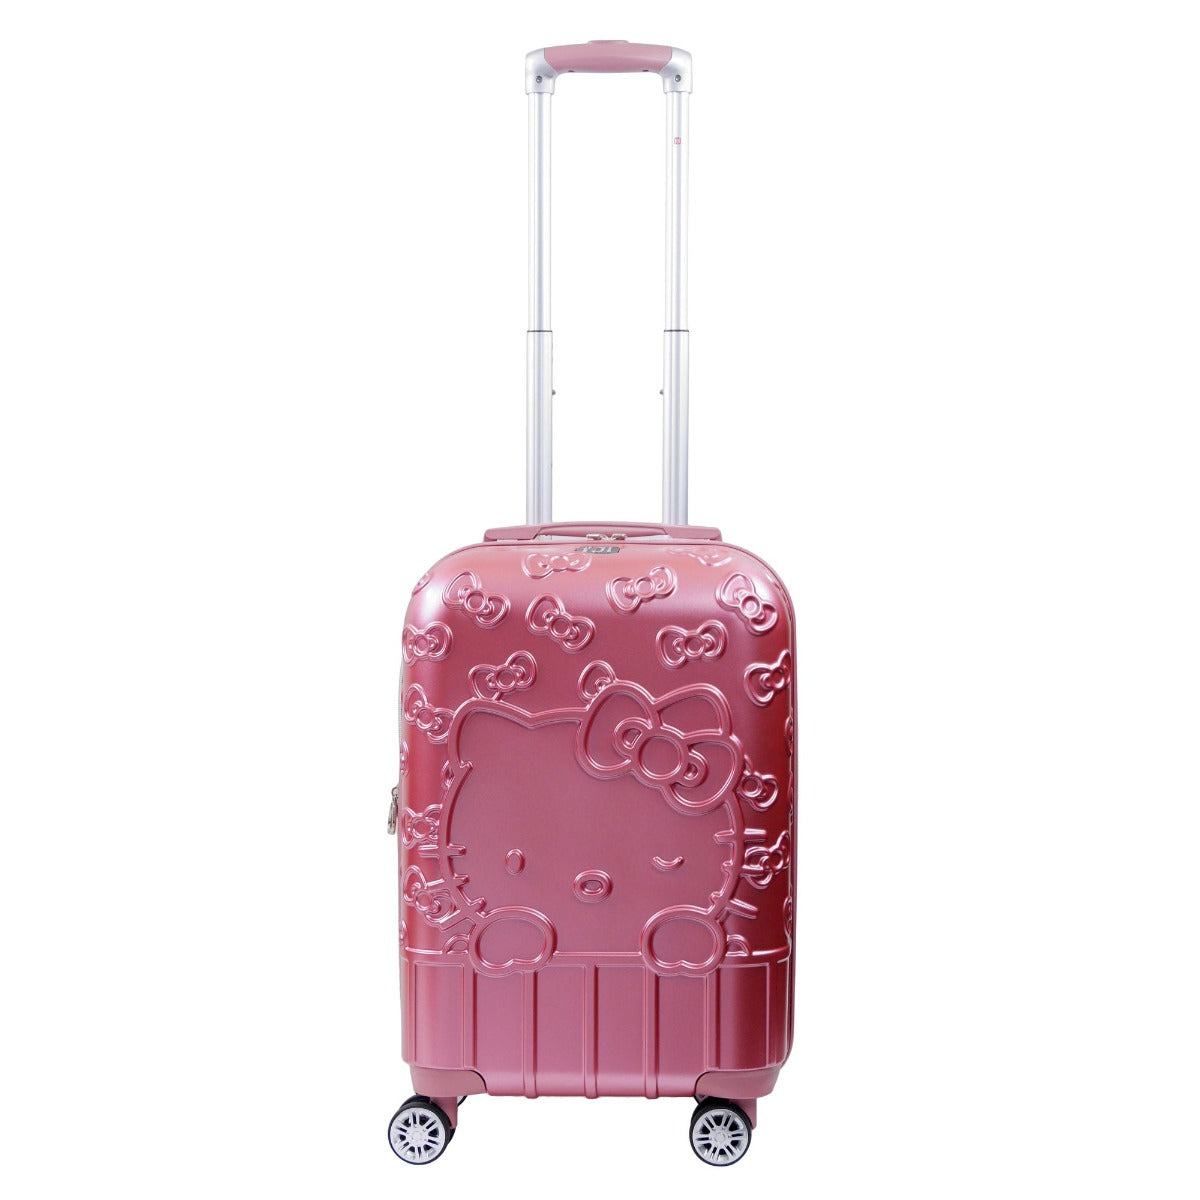 Ful X Hello Kitty Molded Portrait 22.5" pink spinner suitcase - best carry-on luggage for traveling